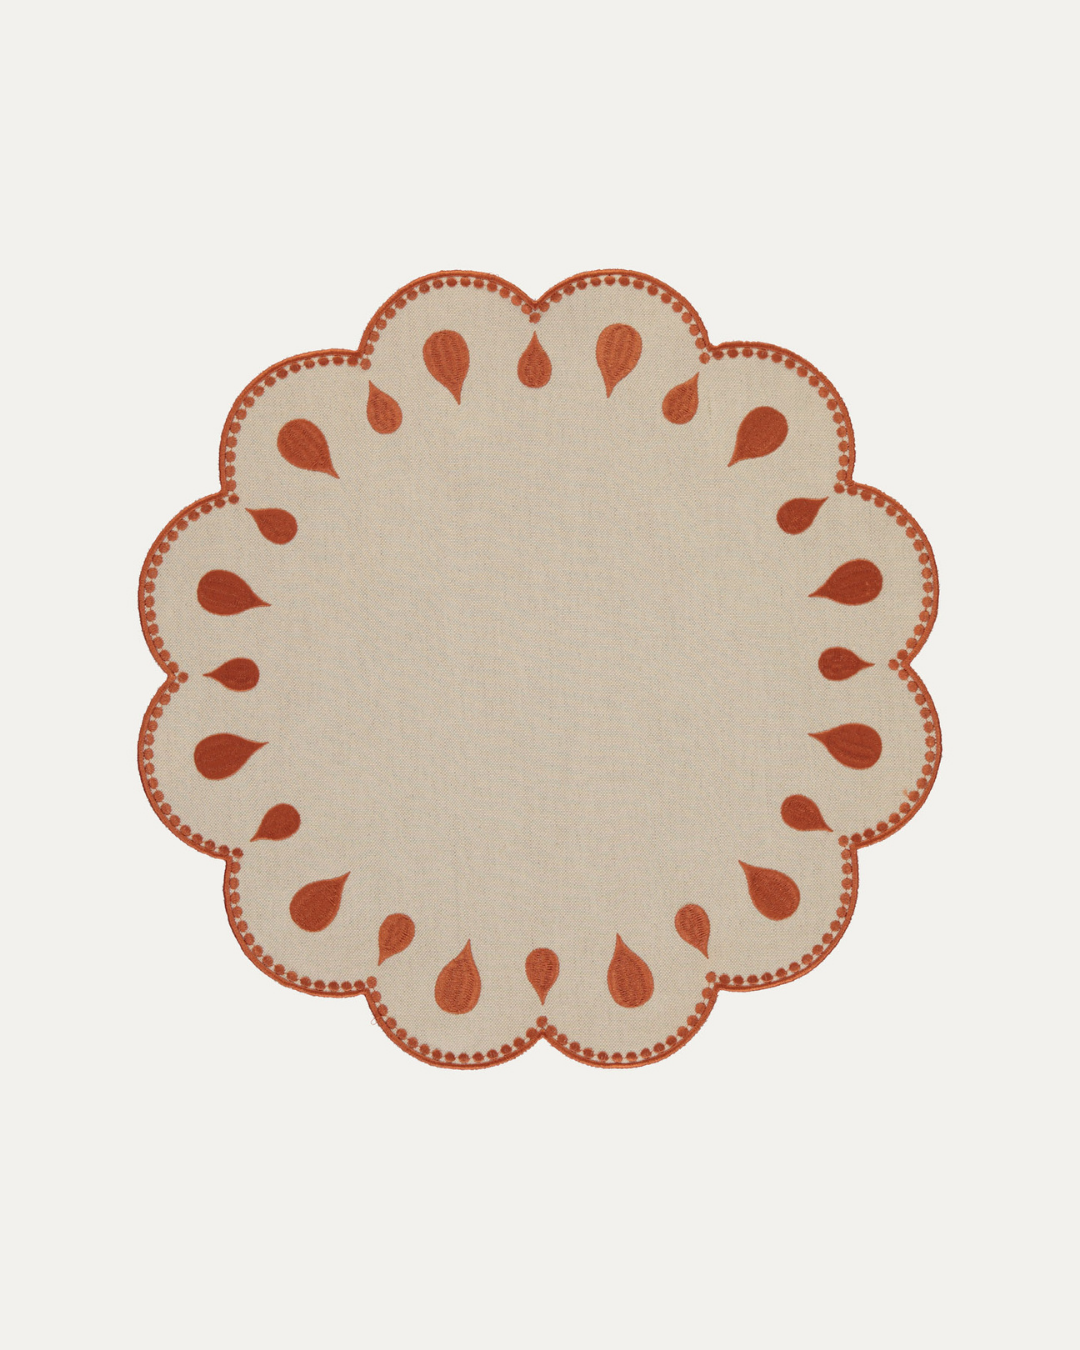 Gotas Placemat, Beige with Terracotta